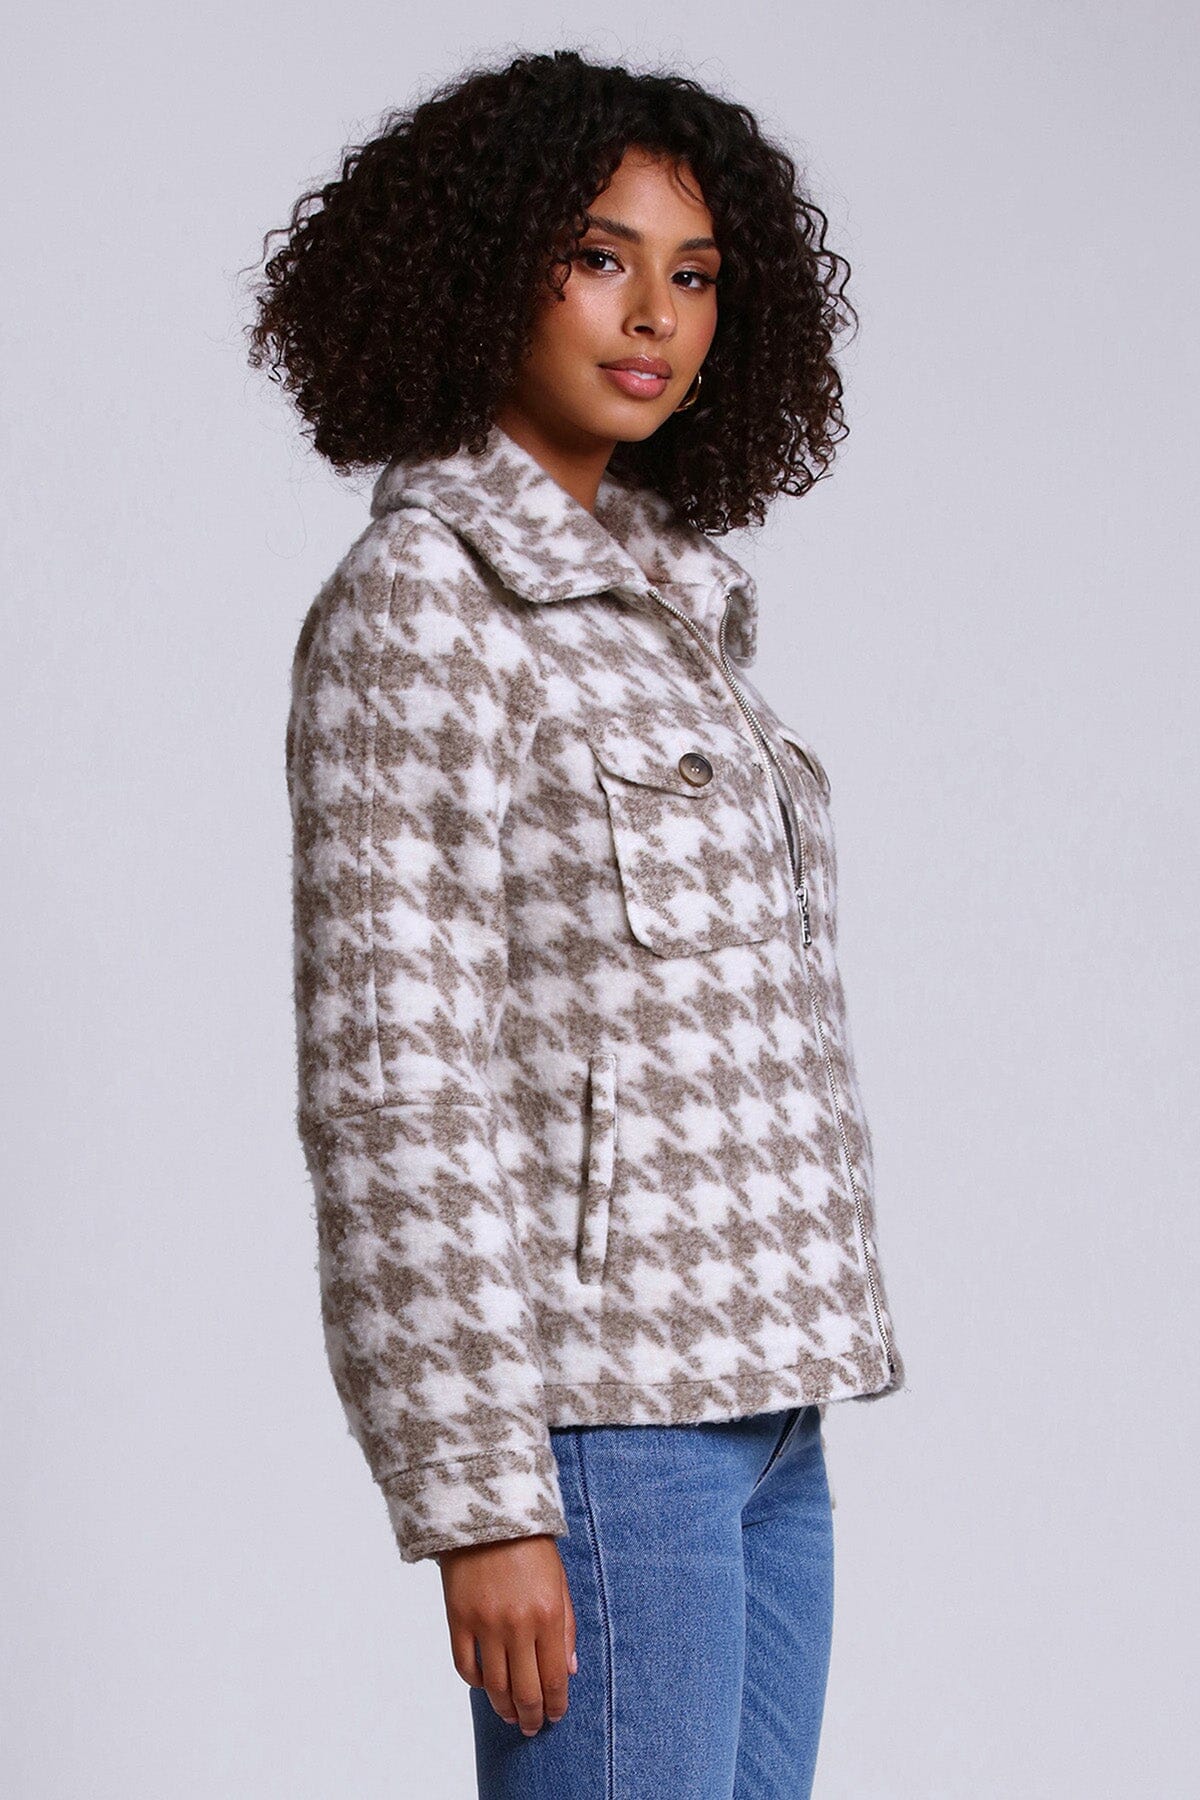 printed full zip up front jacket shacket coat neutral tan beige and cream plaid - 